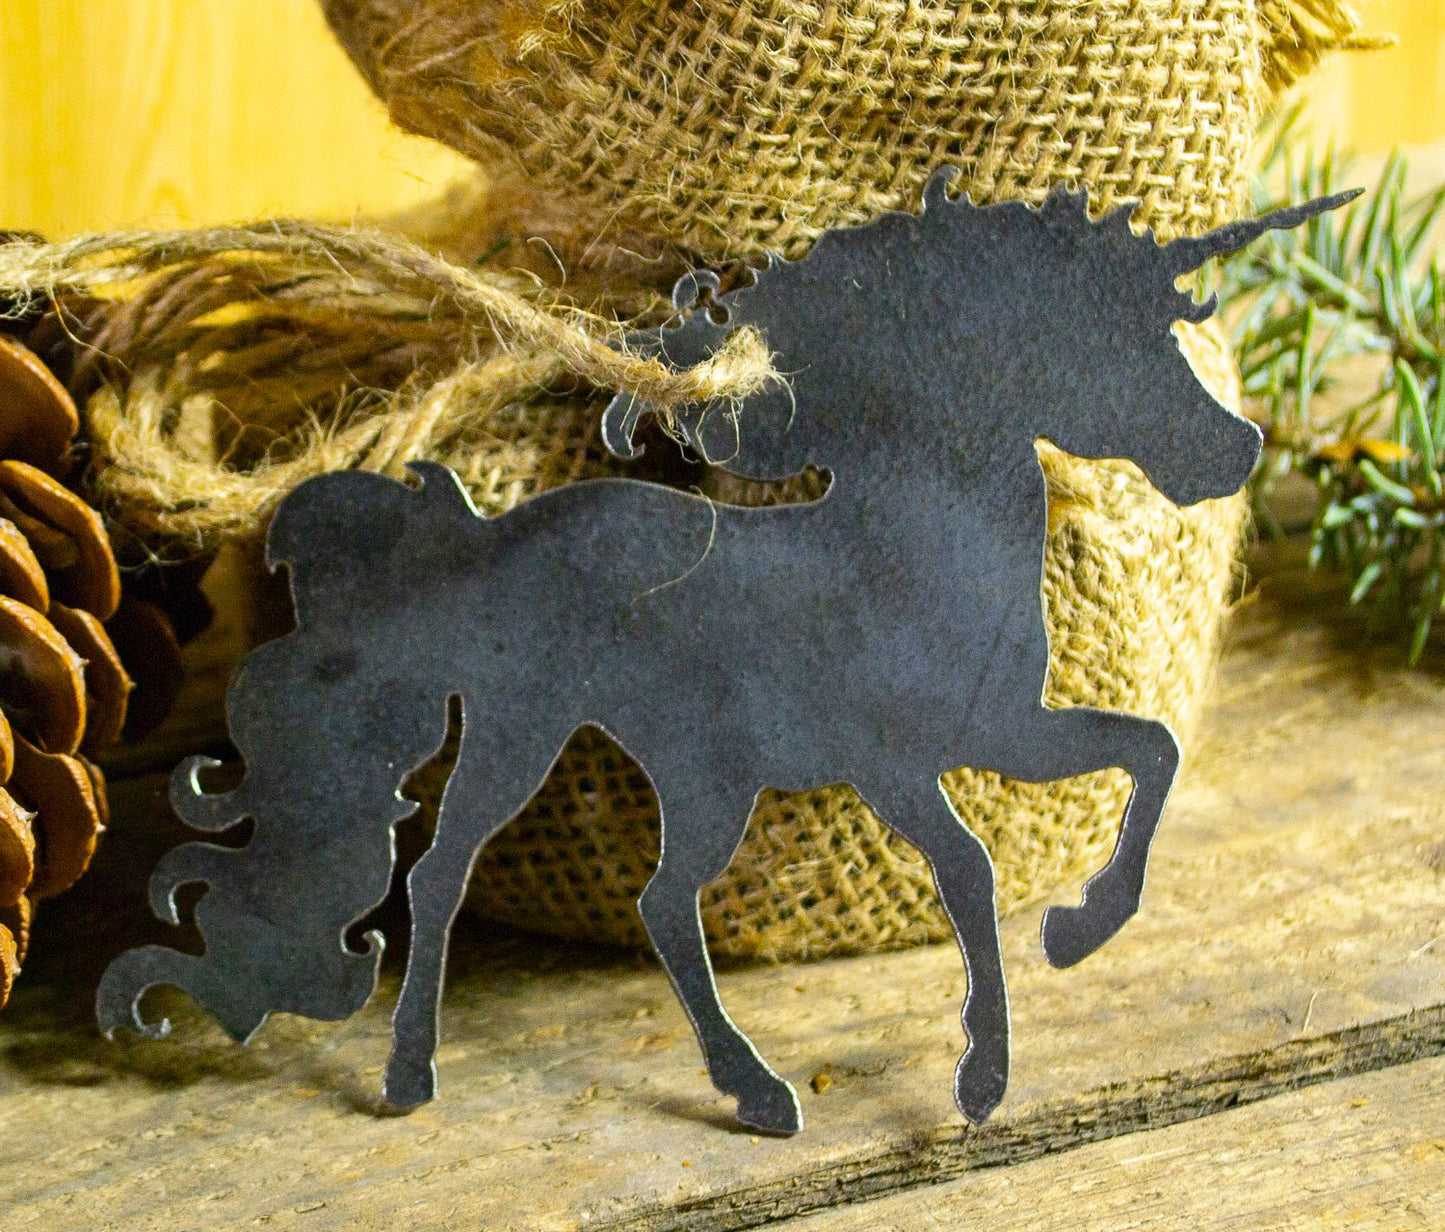 Unicorn Fantasy Metal Christmas Ornament Tree Stocking Stuffer Party Favor Holiday Decoration Raw Steel Gift Recycled Nature Home Decor